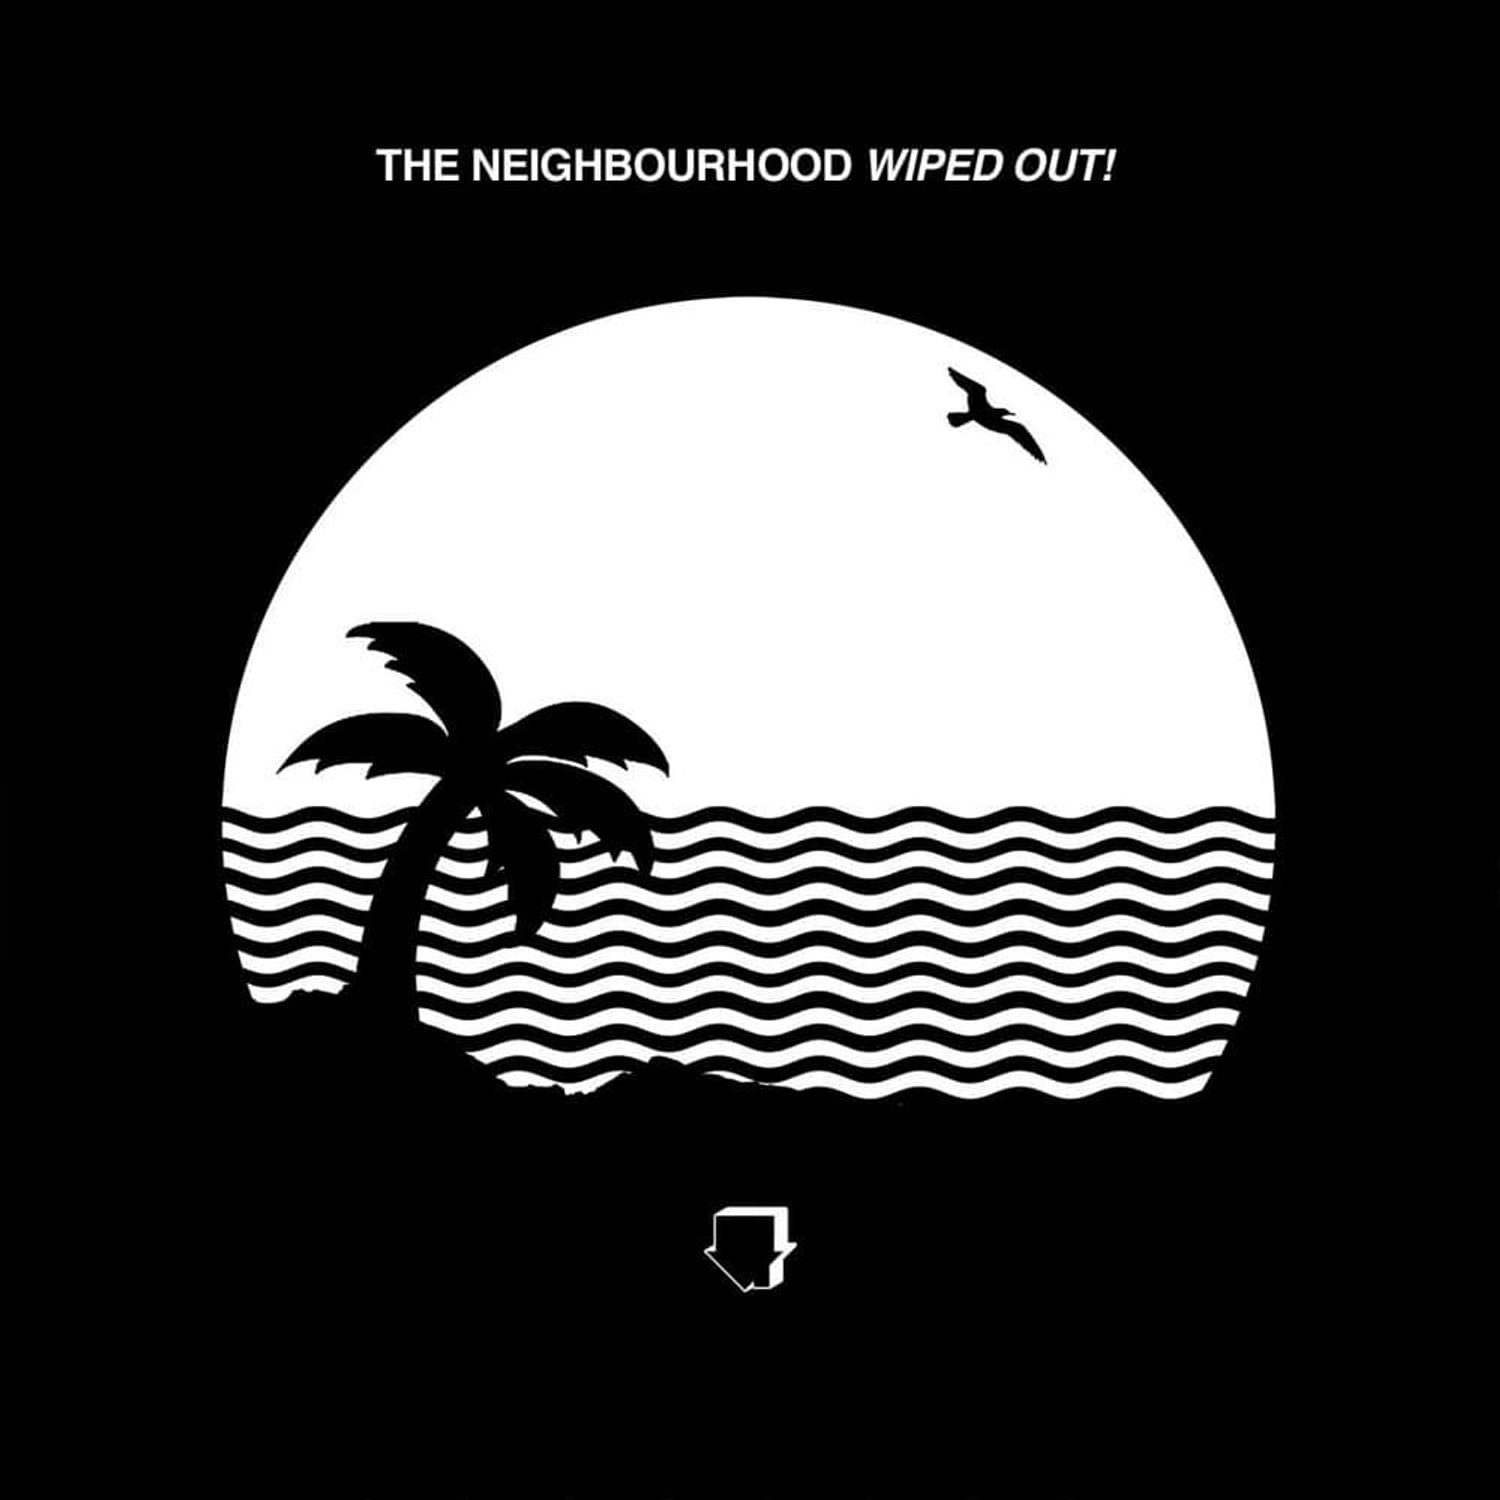 The Neighbourhood 'Sweater Weather' - The Song of the Week for 3